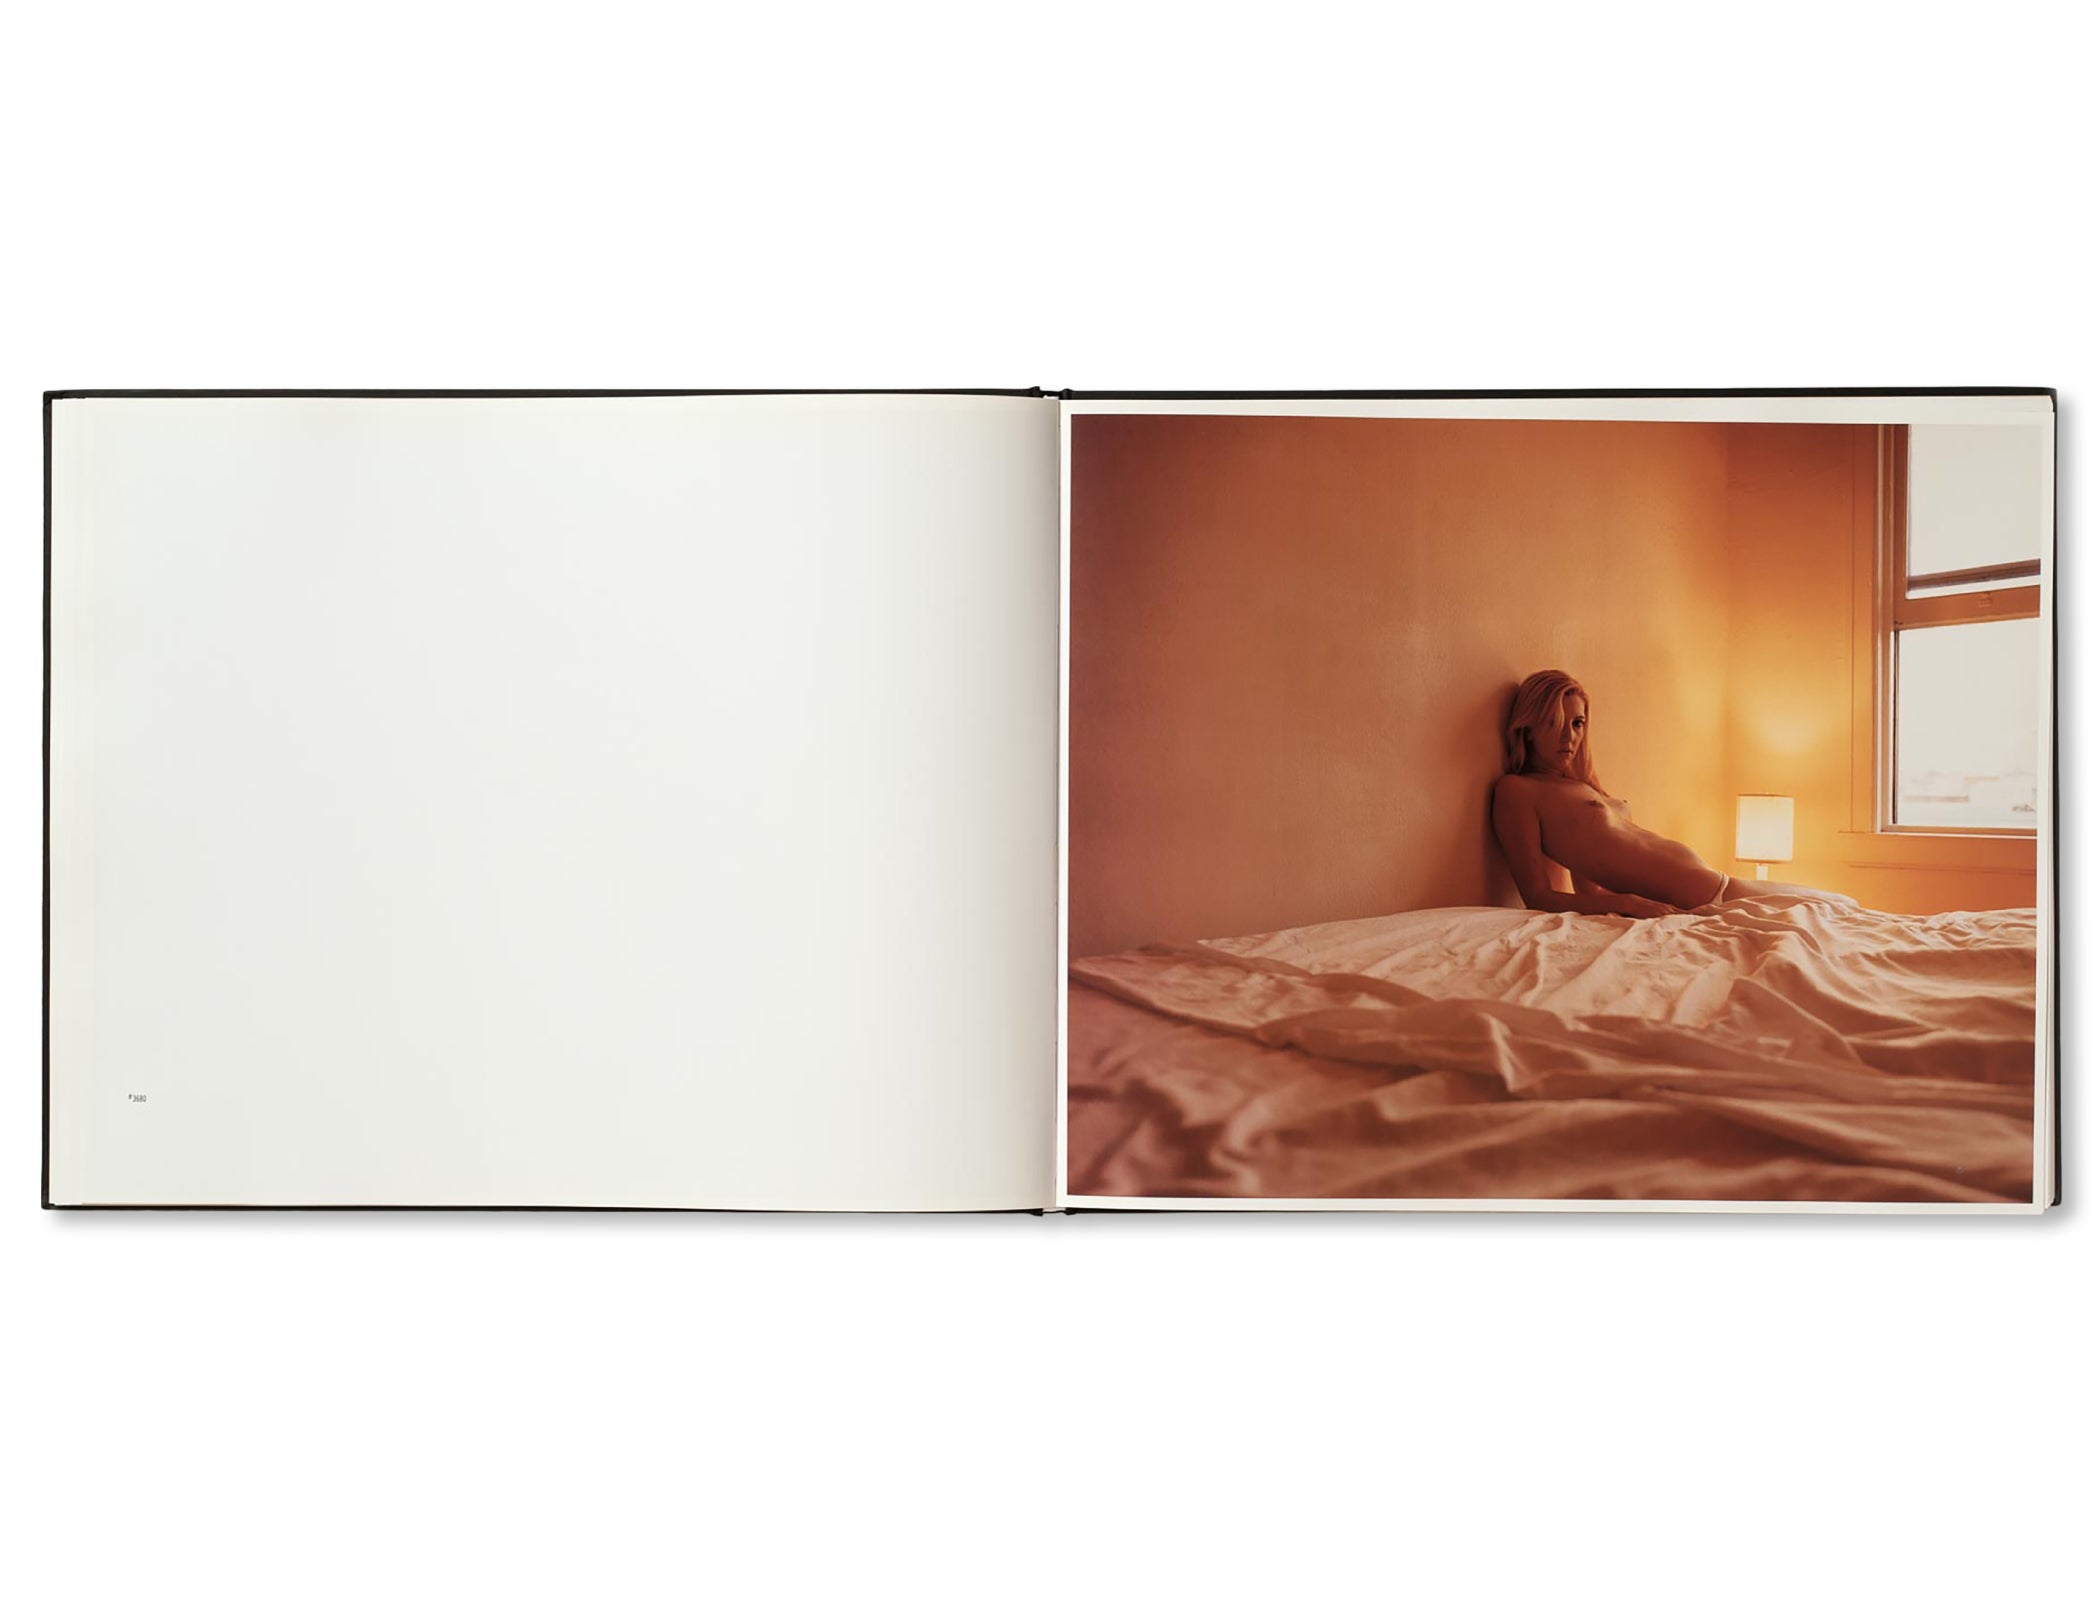 BETWEEN THE TWO by Todd Hido [SECOND EDITION]